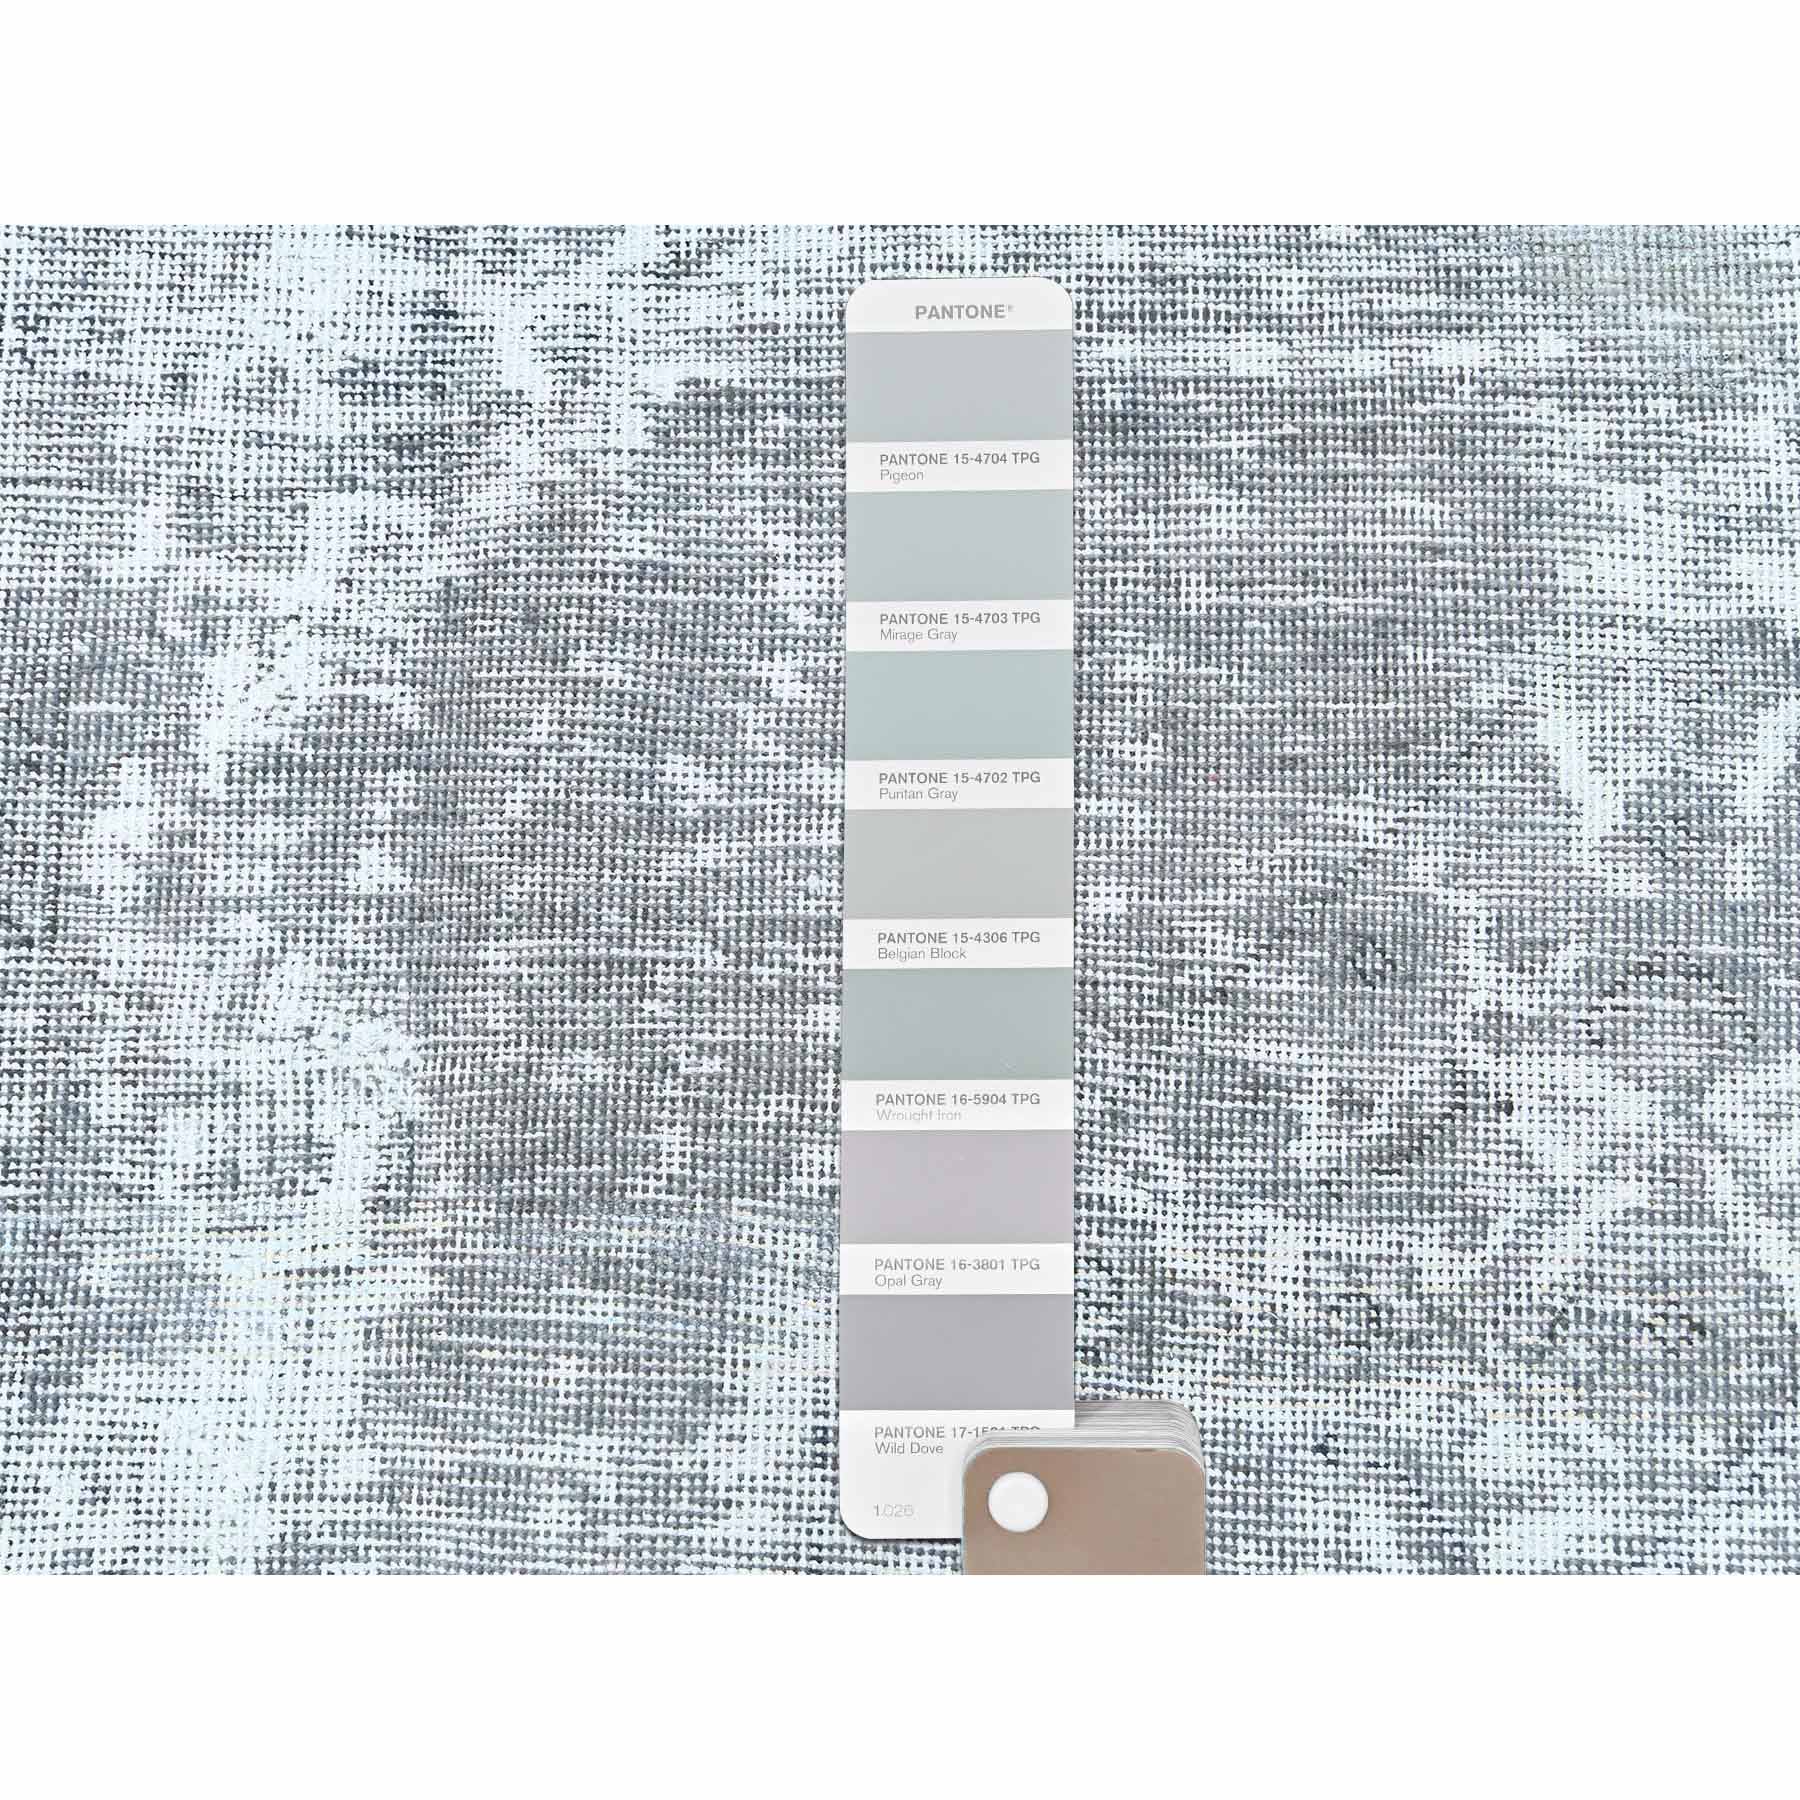 Overdyed-Vintage-Hand-Knotted-Rug-410520